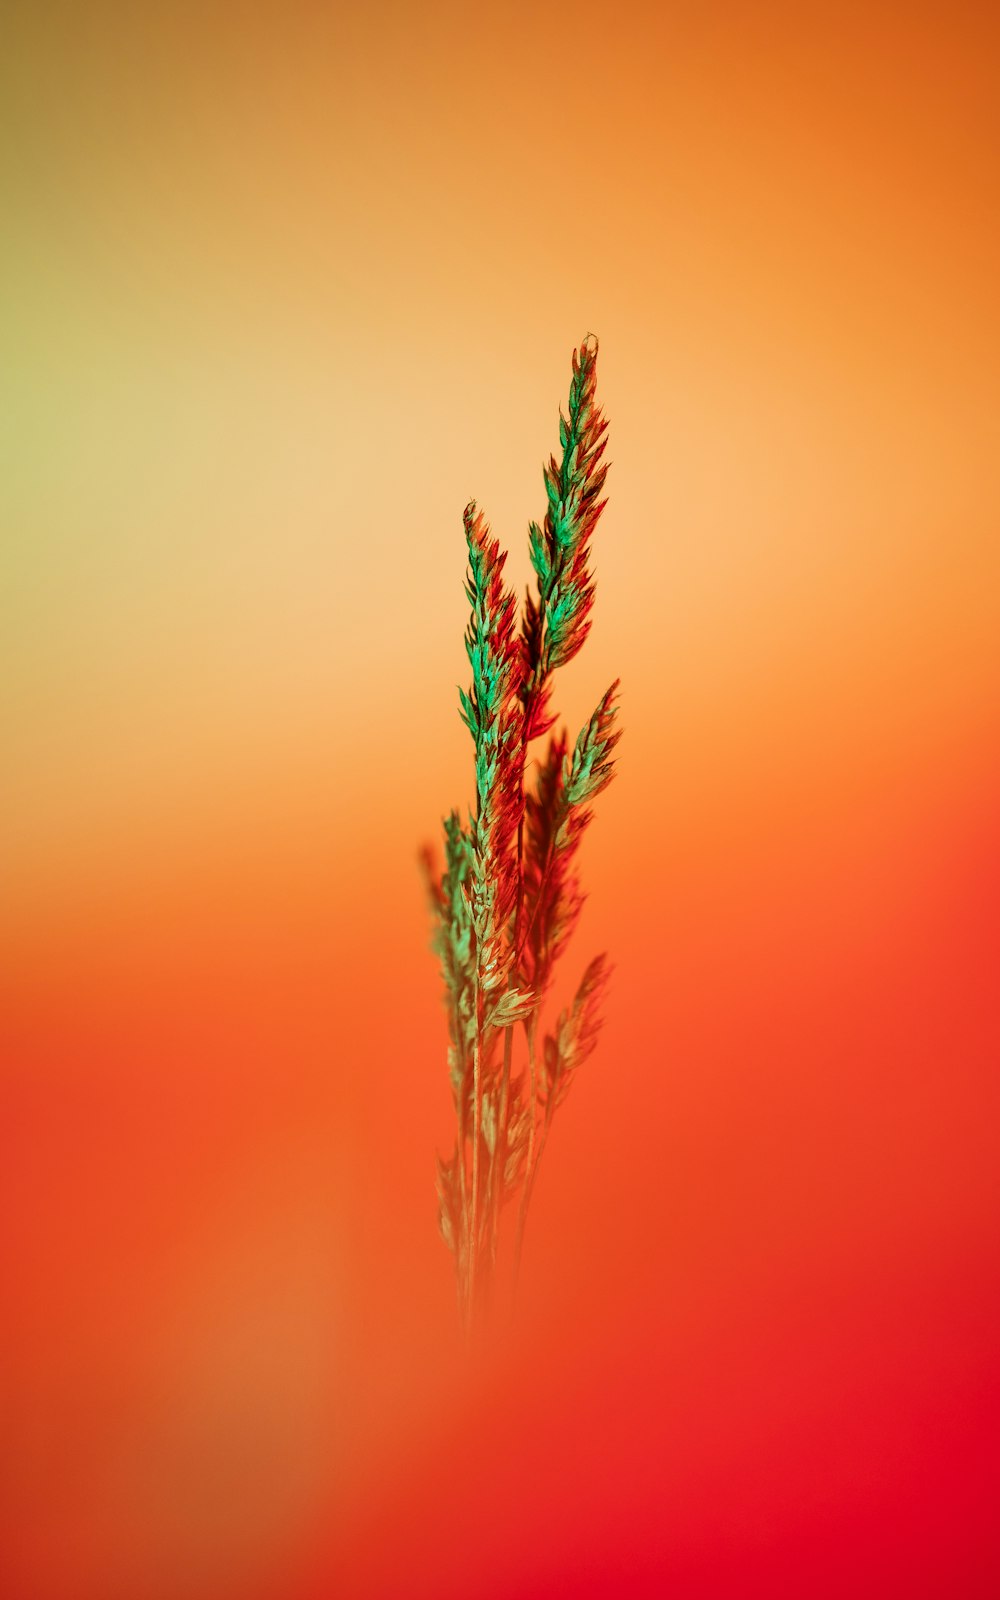 a red and green plant on a red and yellow background